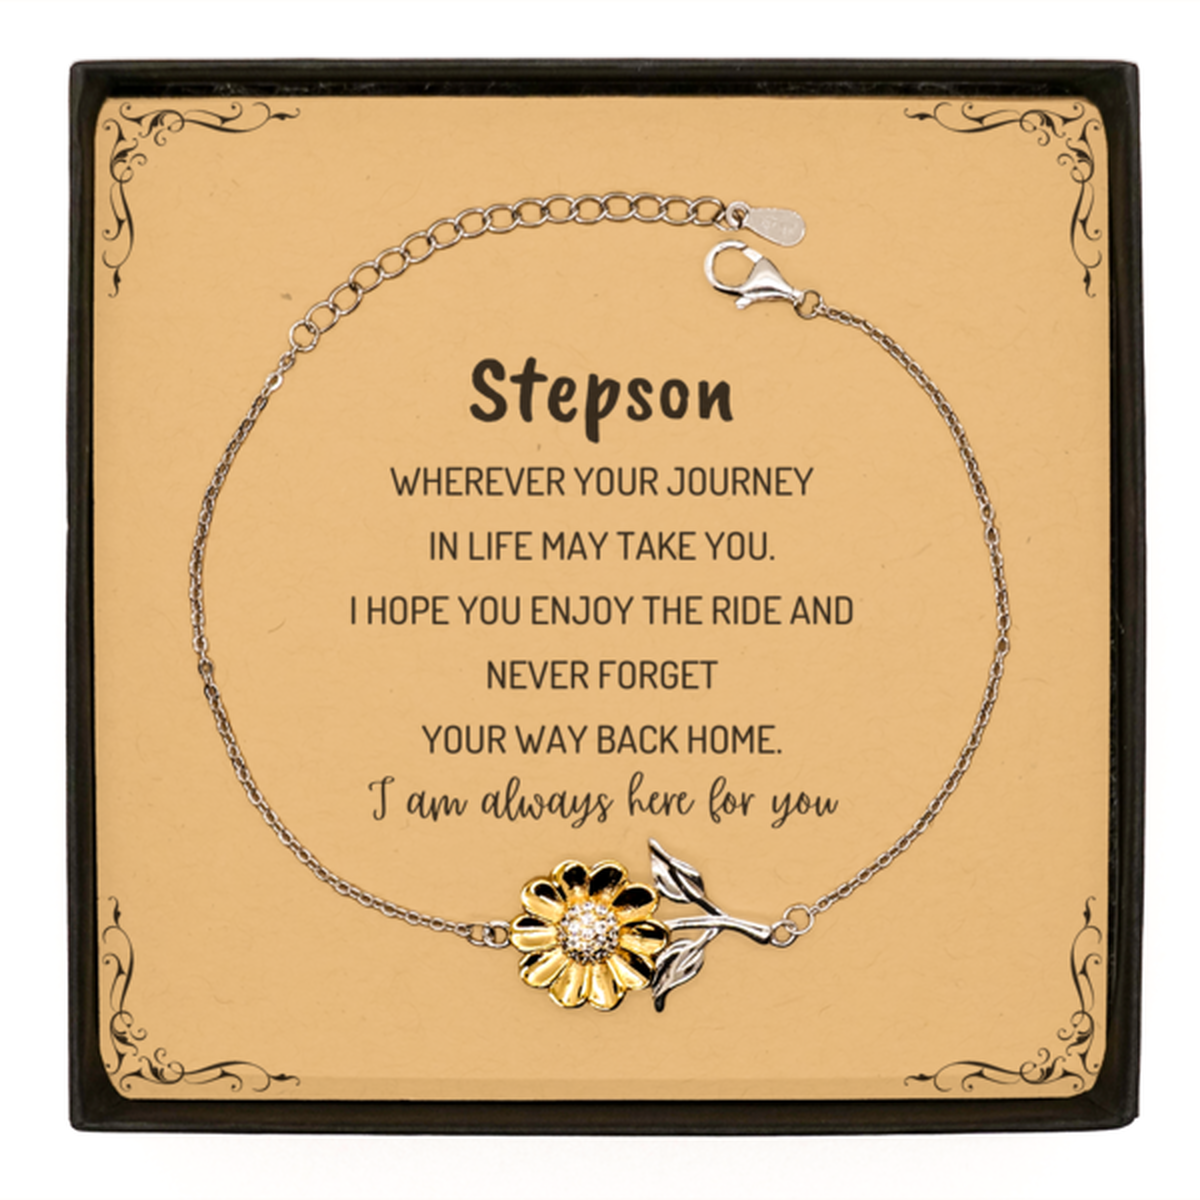 Stepson wherever your journey in life may take you, I am always here for you Stepson Sunflower Bracelet, Awesome Christmas Gifts For Stepson Message Card, Stepson Birthday Gifts for Men Women Family Loved One